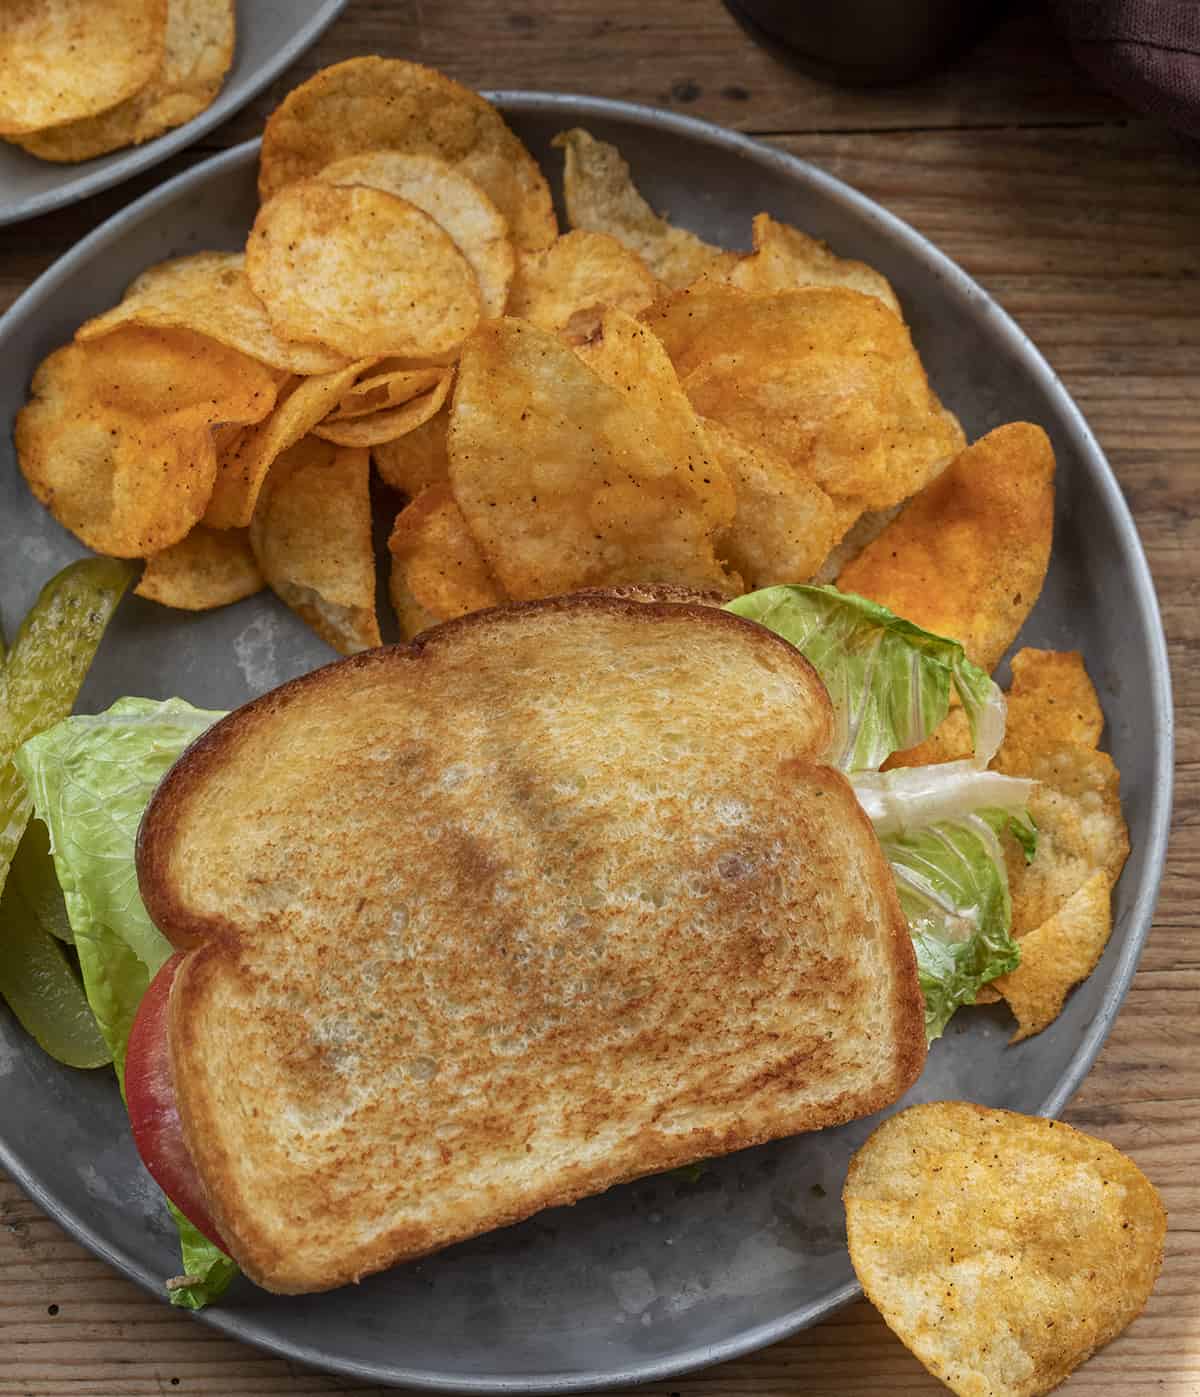 BLT with Tomato Jam on a Plate with Chips. Dinner, Supper, Sandwich, Deluxe BLT, Tomato Jam Sandwich, How to Use Tomato Jam, Toasted BLT, recipes, i am homesteader, iamhomesteader